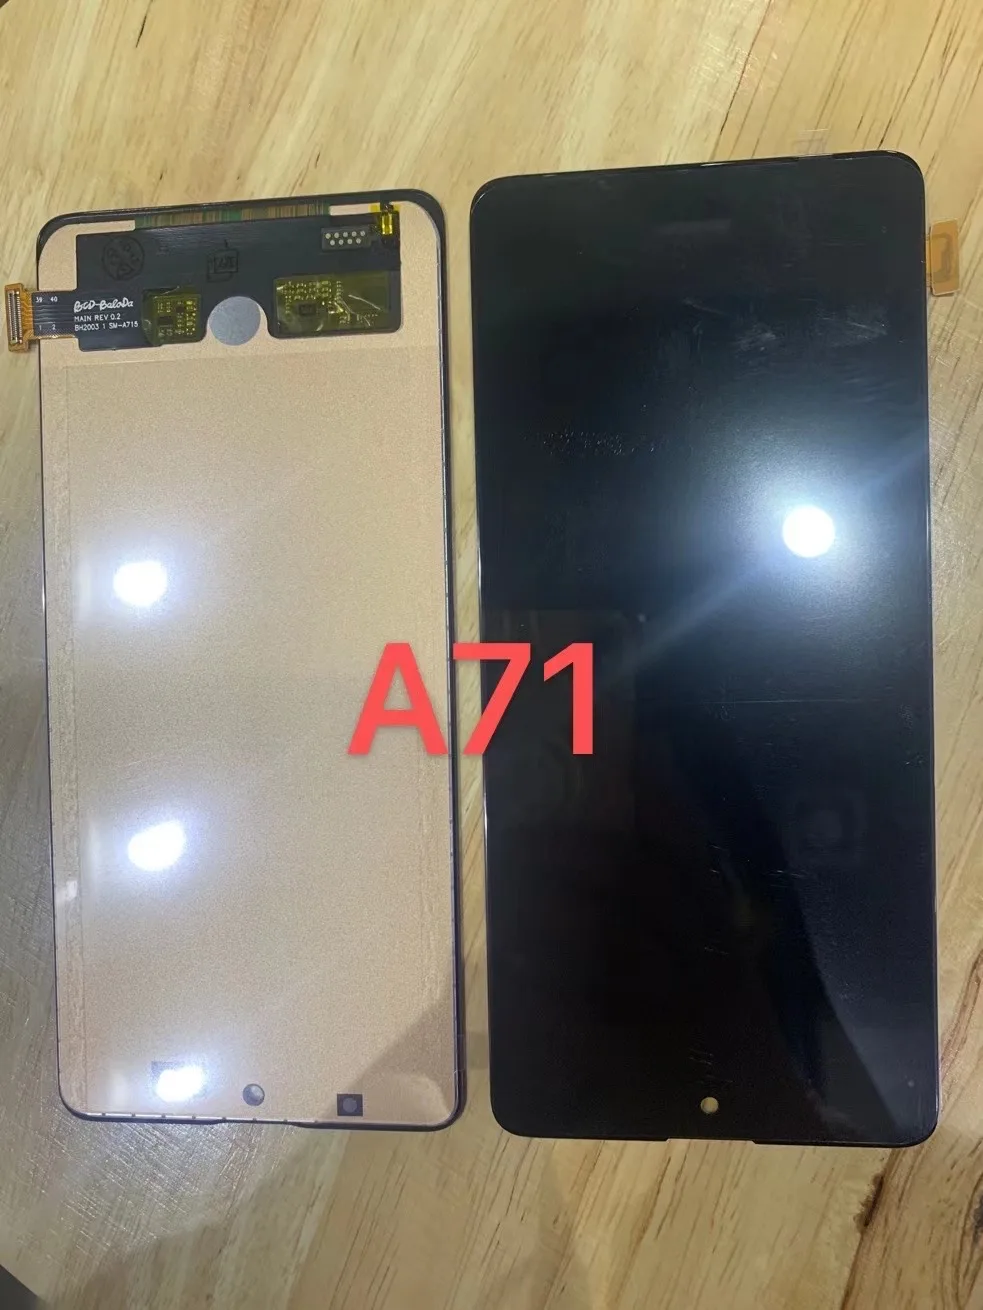 

TFT incell For Samsung Galaxy A71 A715 LCD Display Touch Screen Digitizer Assembly Replacement A71 Display A715 A715F A715FD